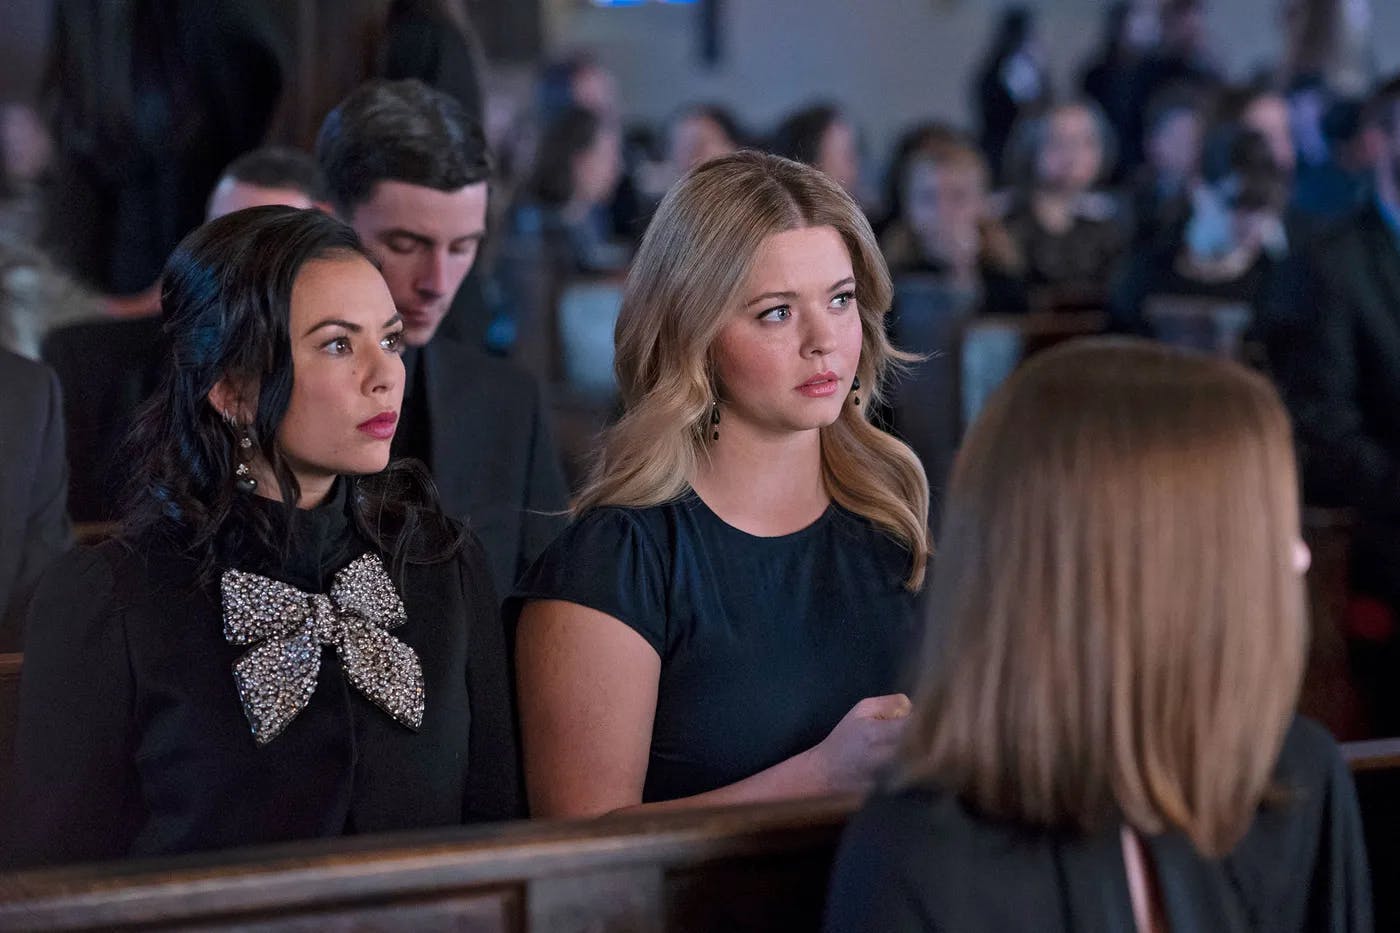 Janel Parrish and Sasha Pieterse for 'The Perfectionists'